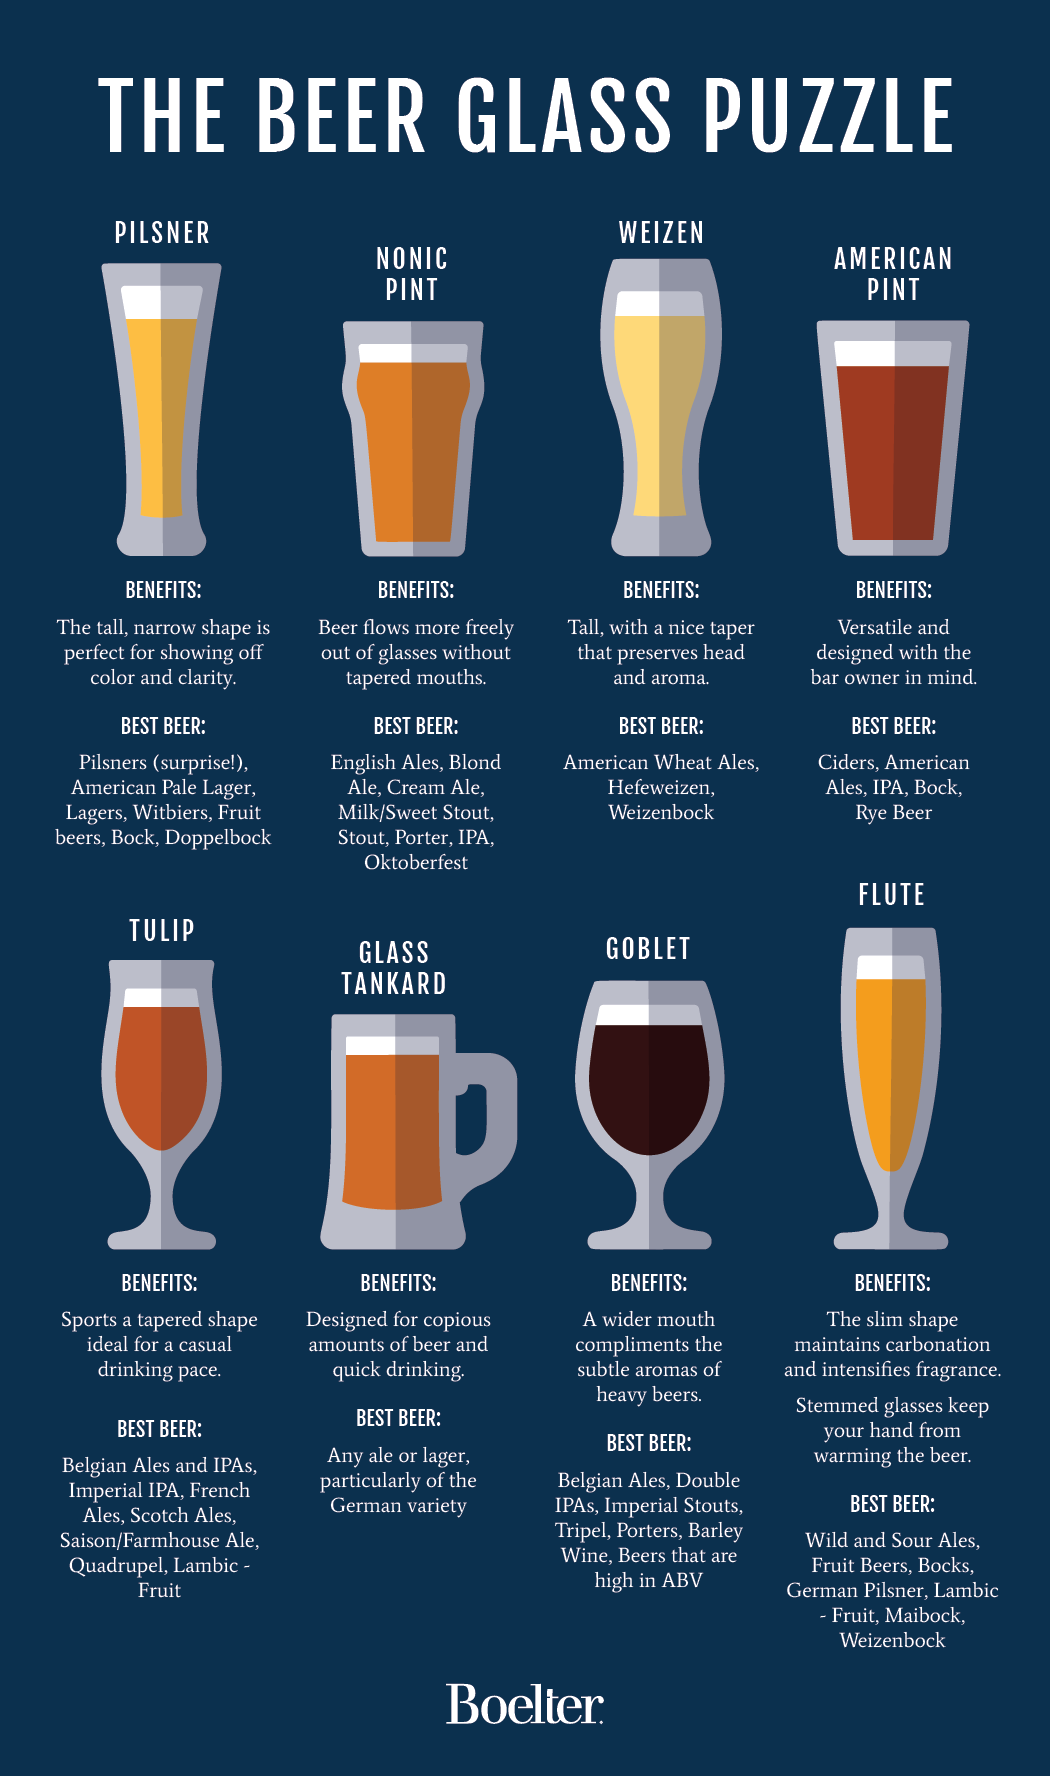 The Complete Guide to Beer Glasses